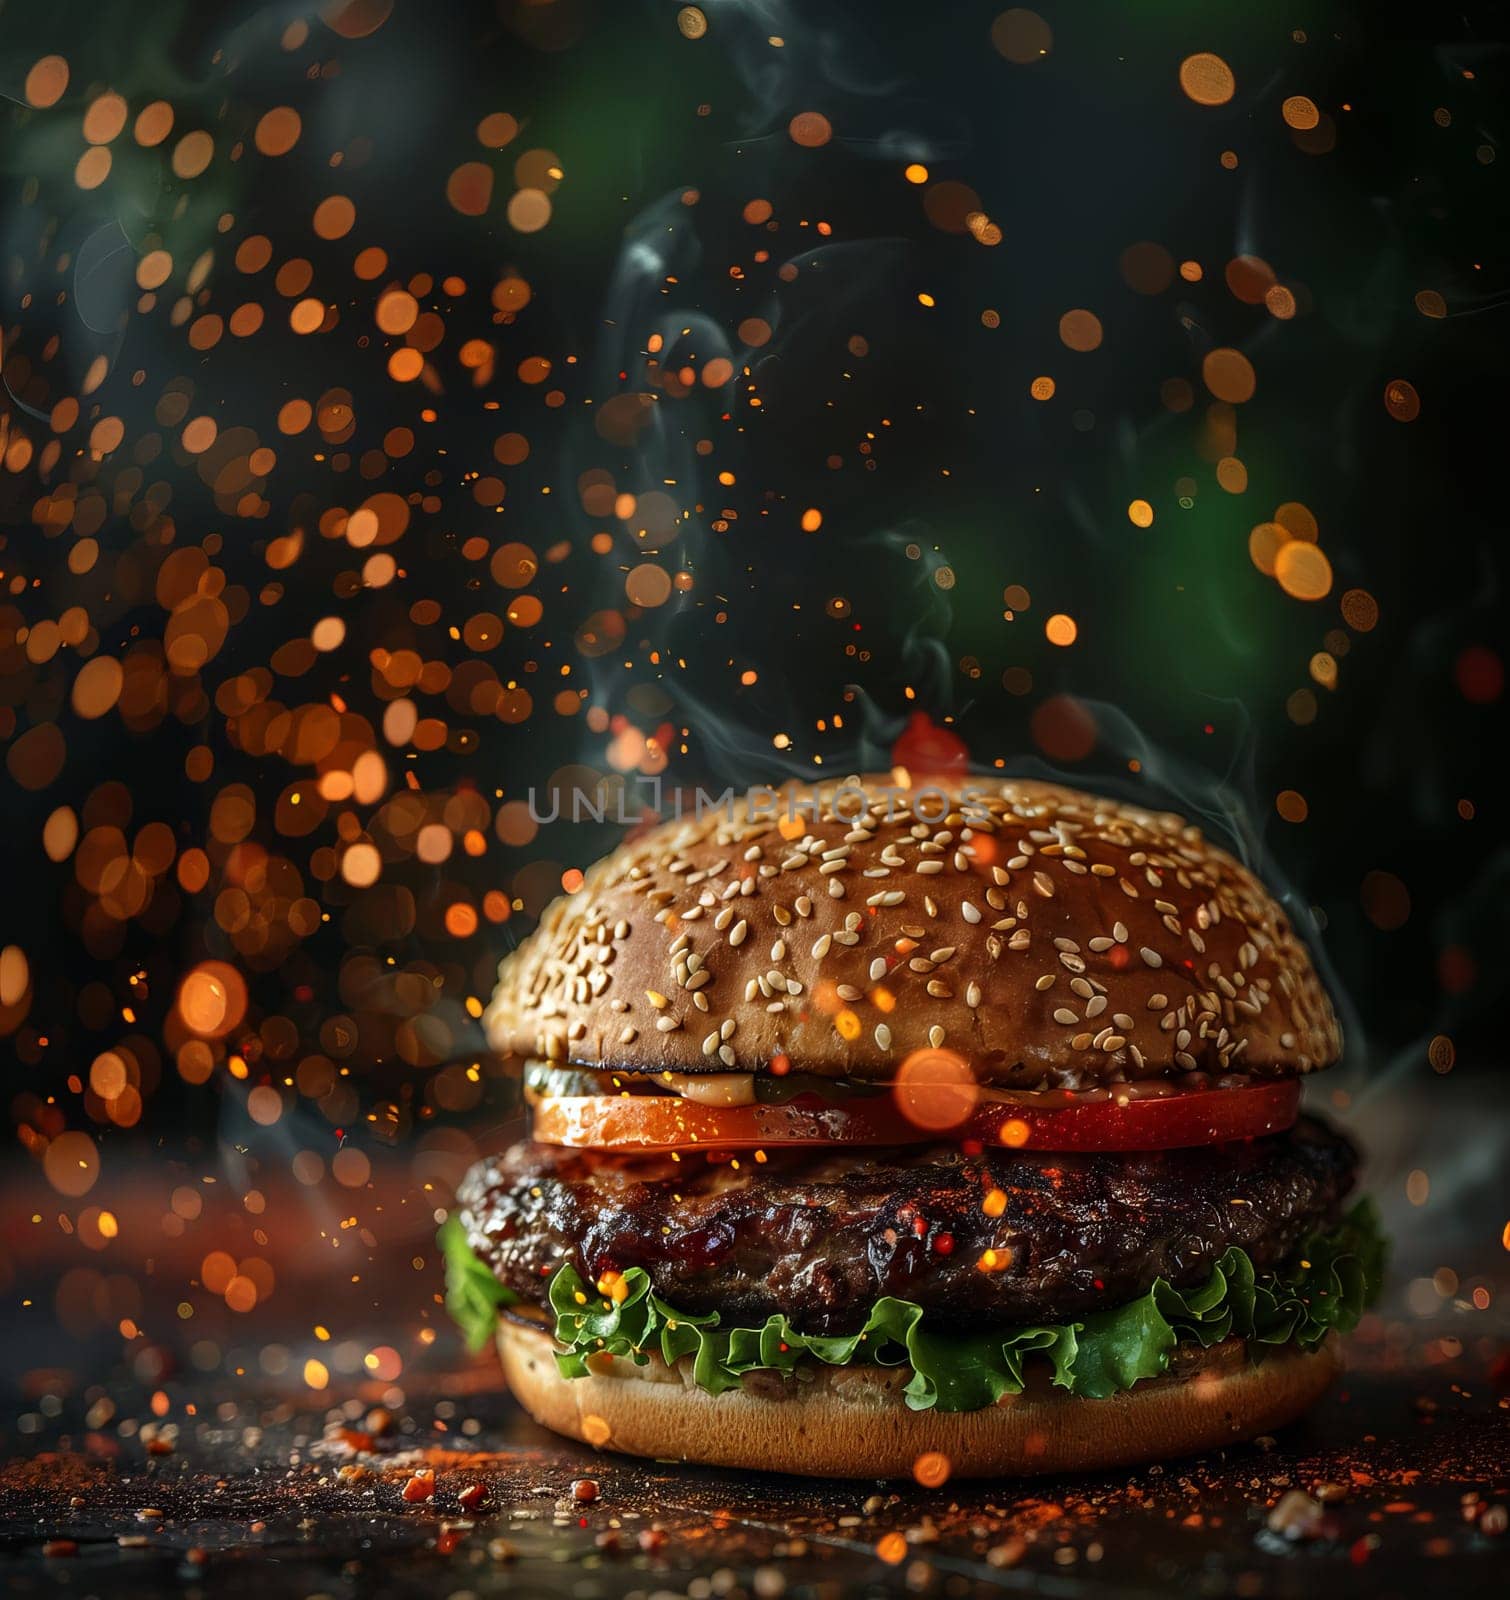 Yummy Burger with Dynamic Particles on Background. Fast Food Advertising Concept by iliris